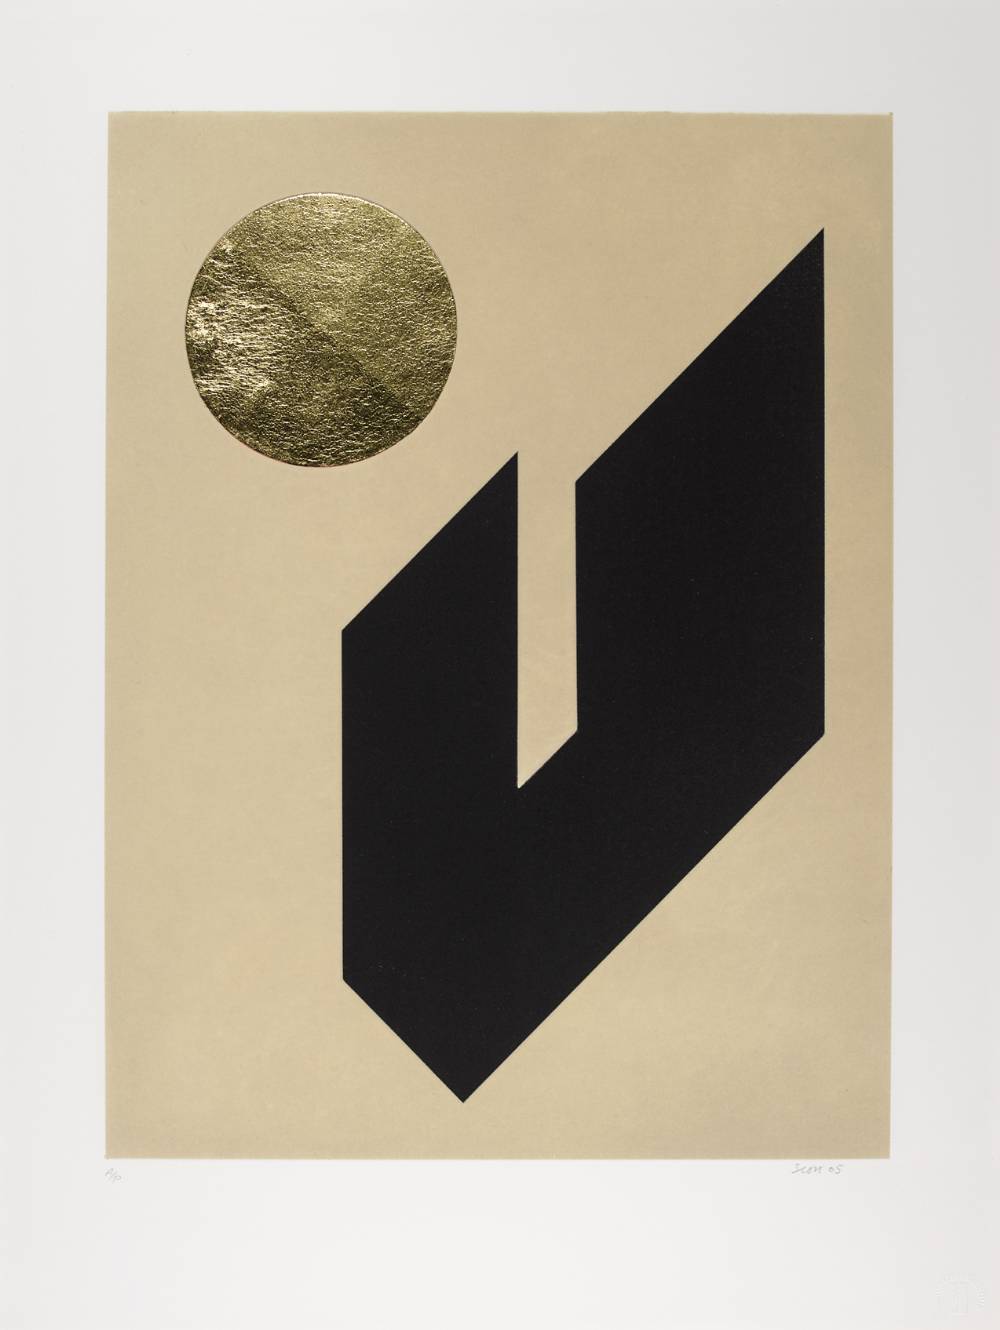 TANGRAM III, 2005 by Patrick Scott sold for 3,600 at Whyte's Auctions